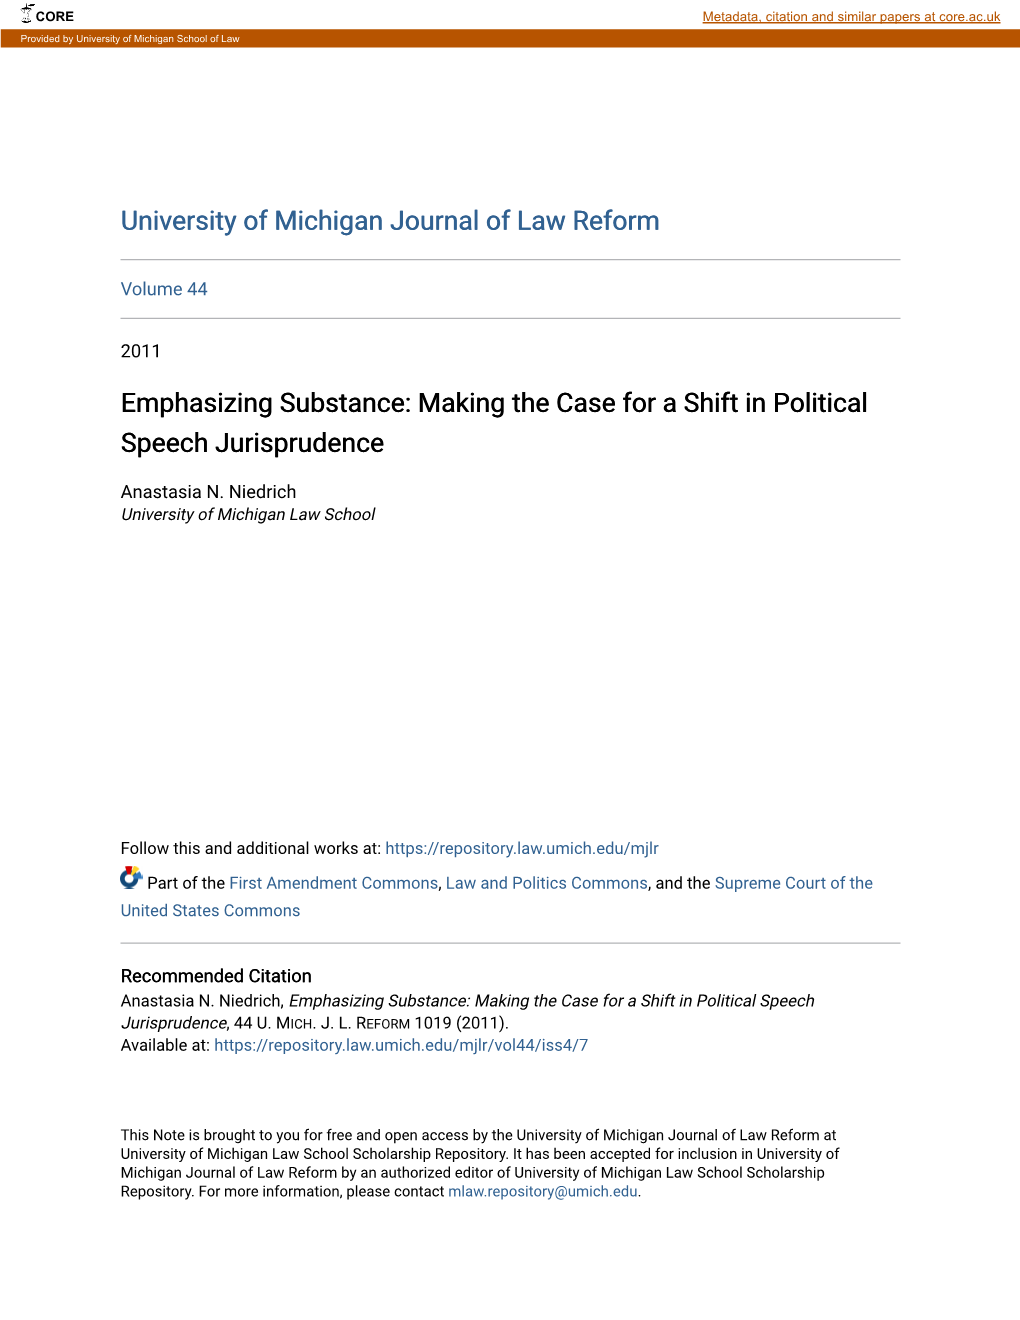 Making the Case for a Shift in Political Speech Jurisprudence